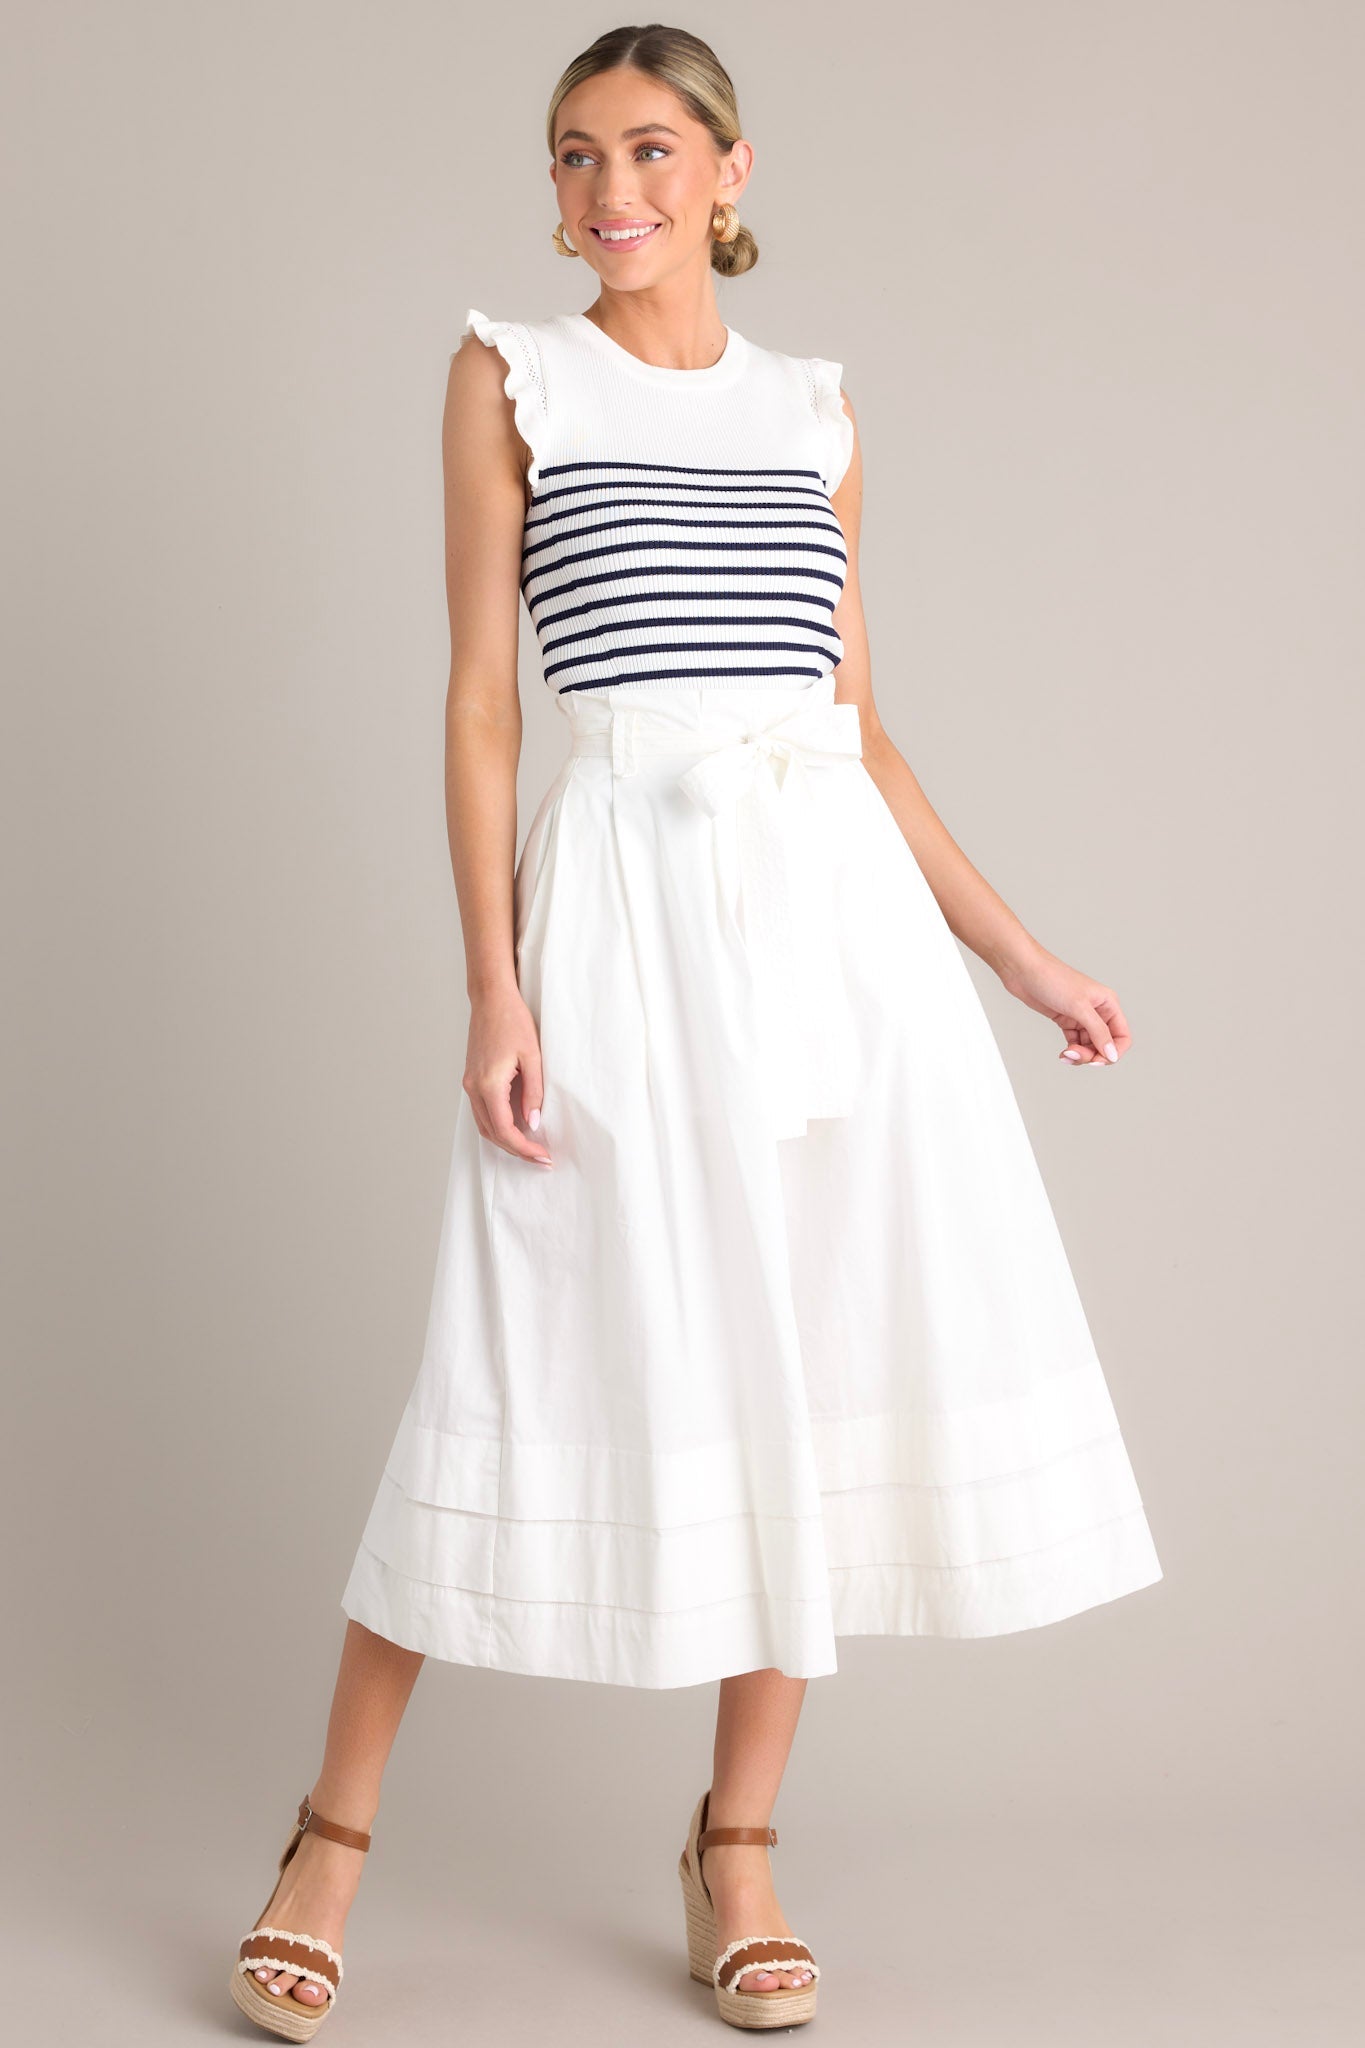 This white & navy striped top features a ribbed crew neckline, horizontal stripes, a stretchy knit fabric, and flutter sleeves.